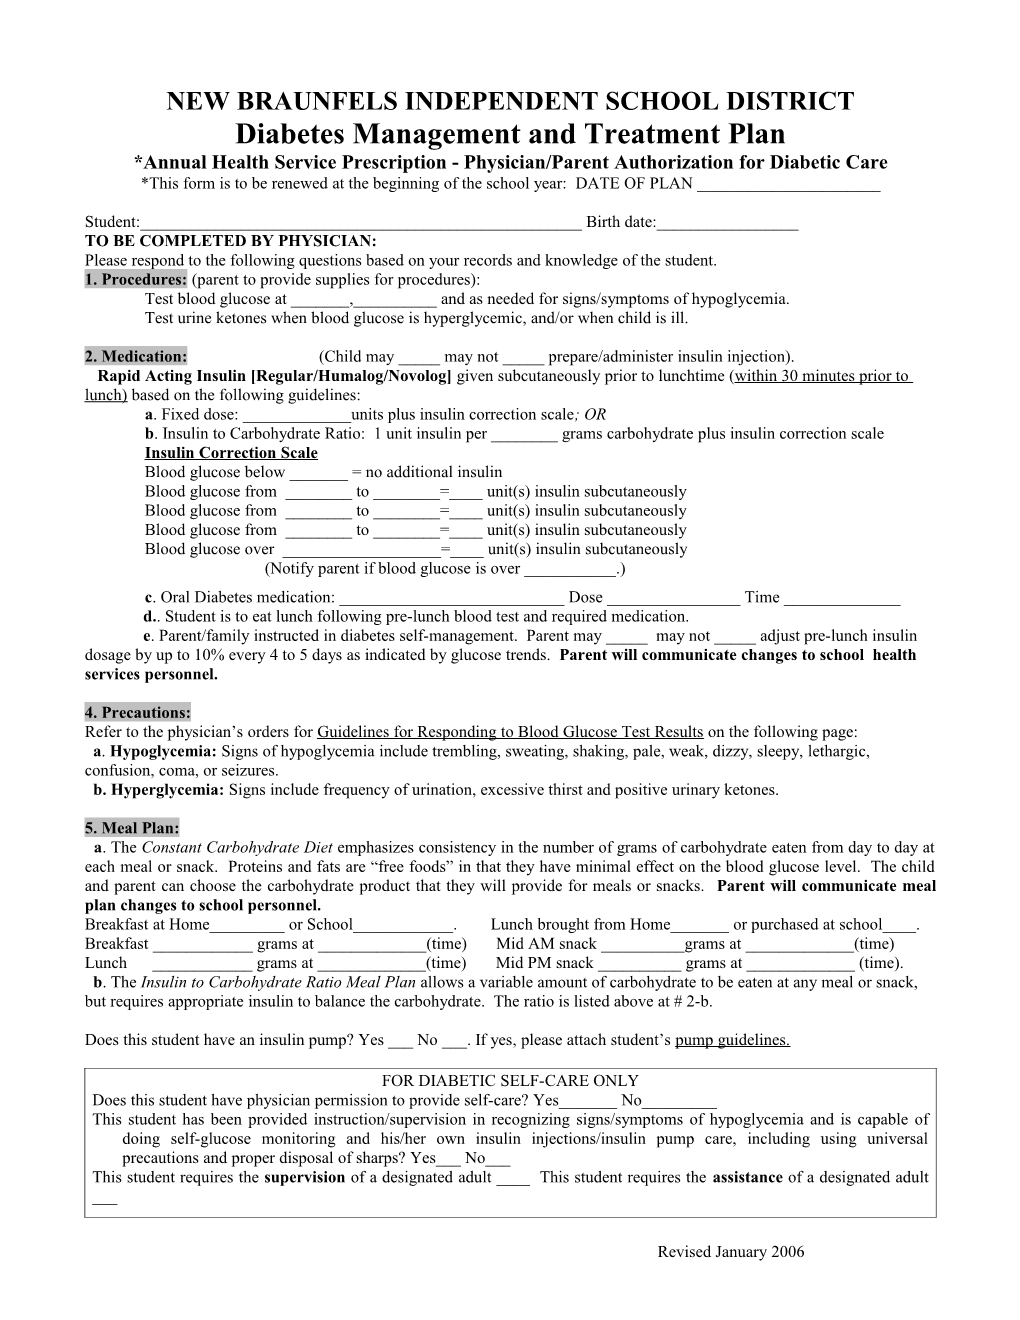 Physician/Parent Request for Administration of Mecicine and Special Procedures by School